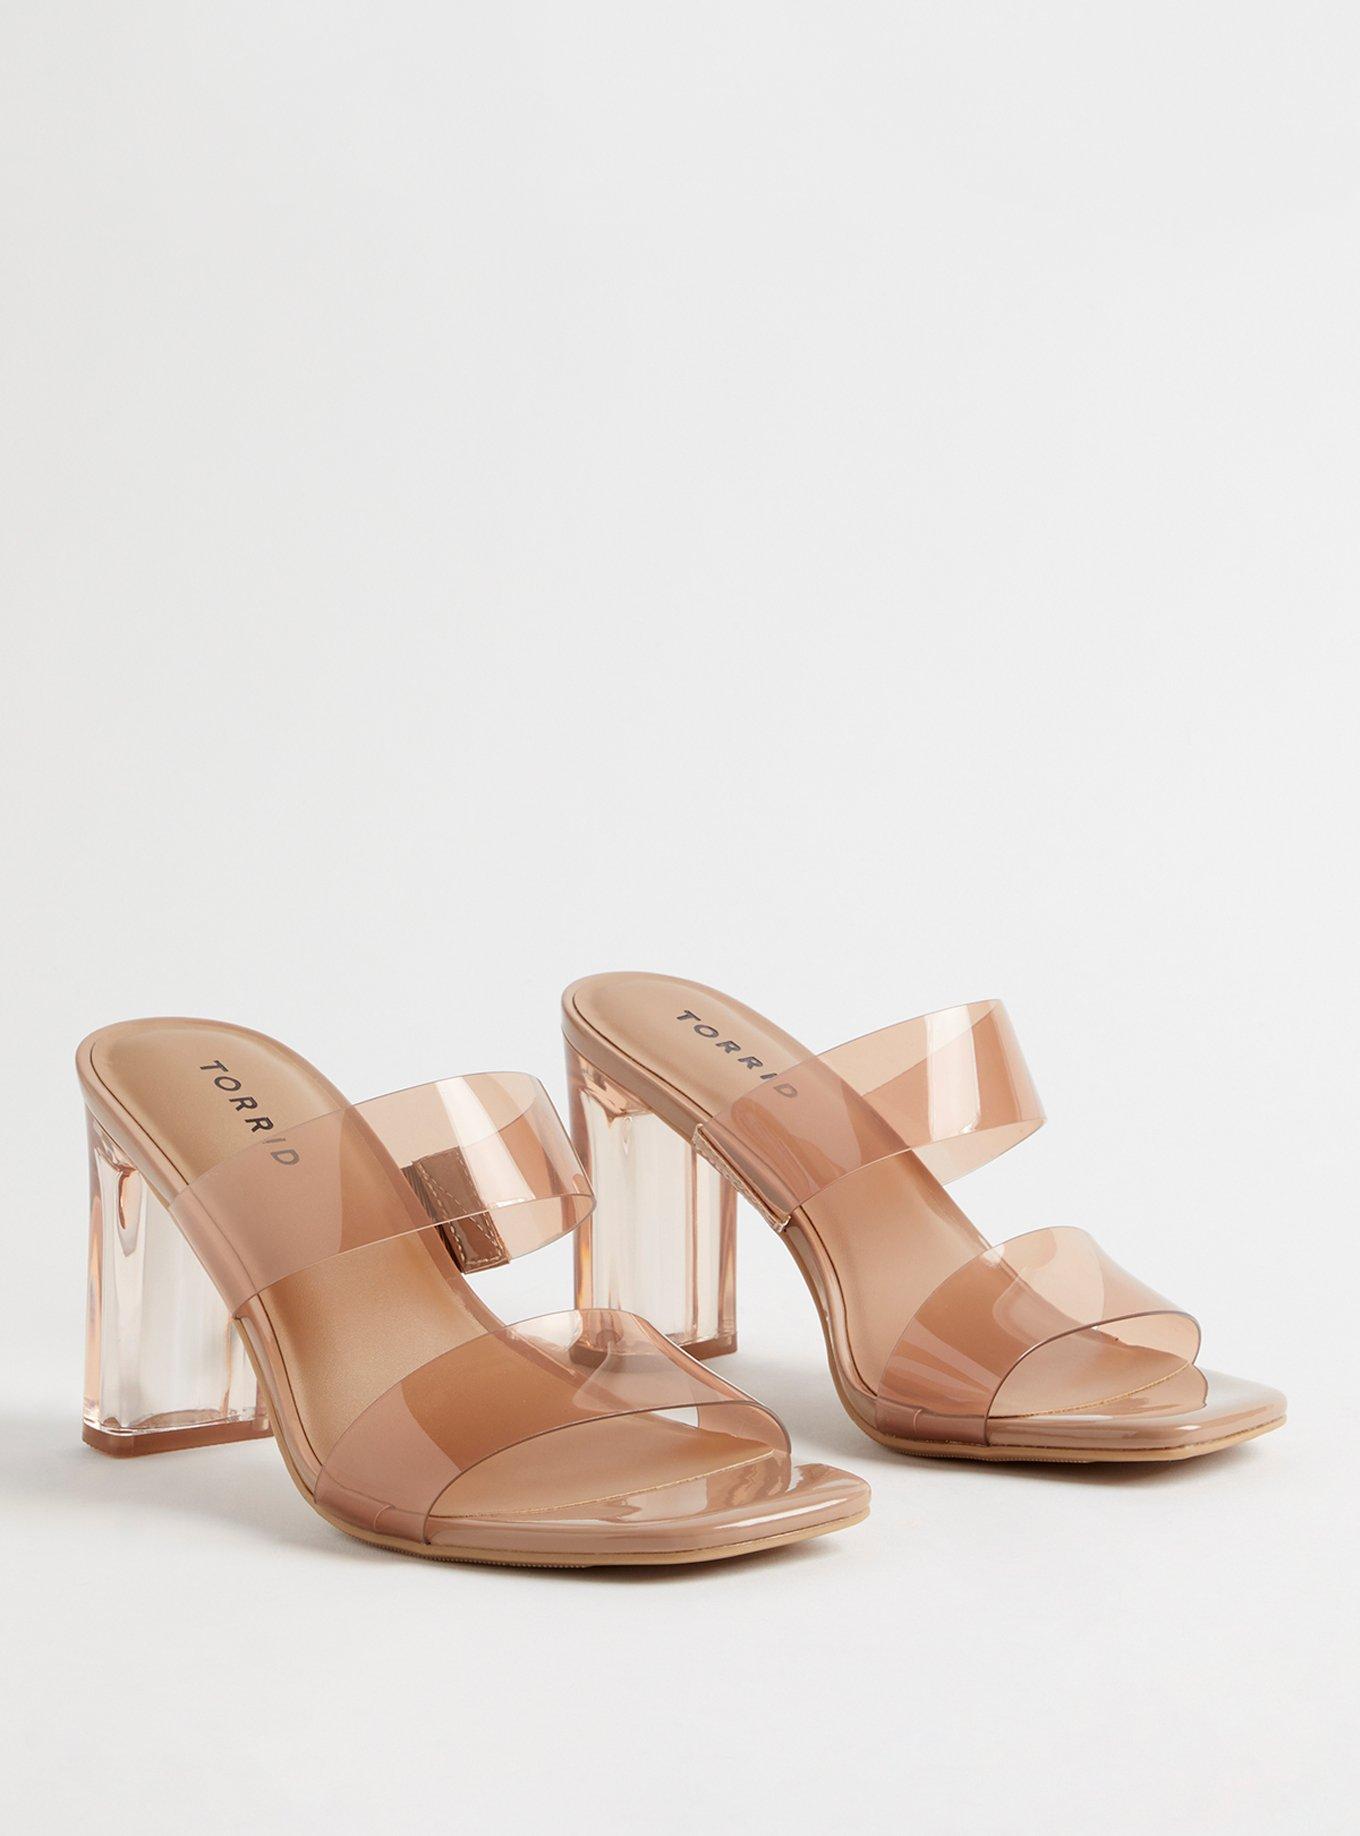 ZARA NEW COLLECTION BAGS & SHOES & SANDALS / MARCH 2021 